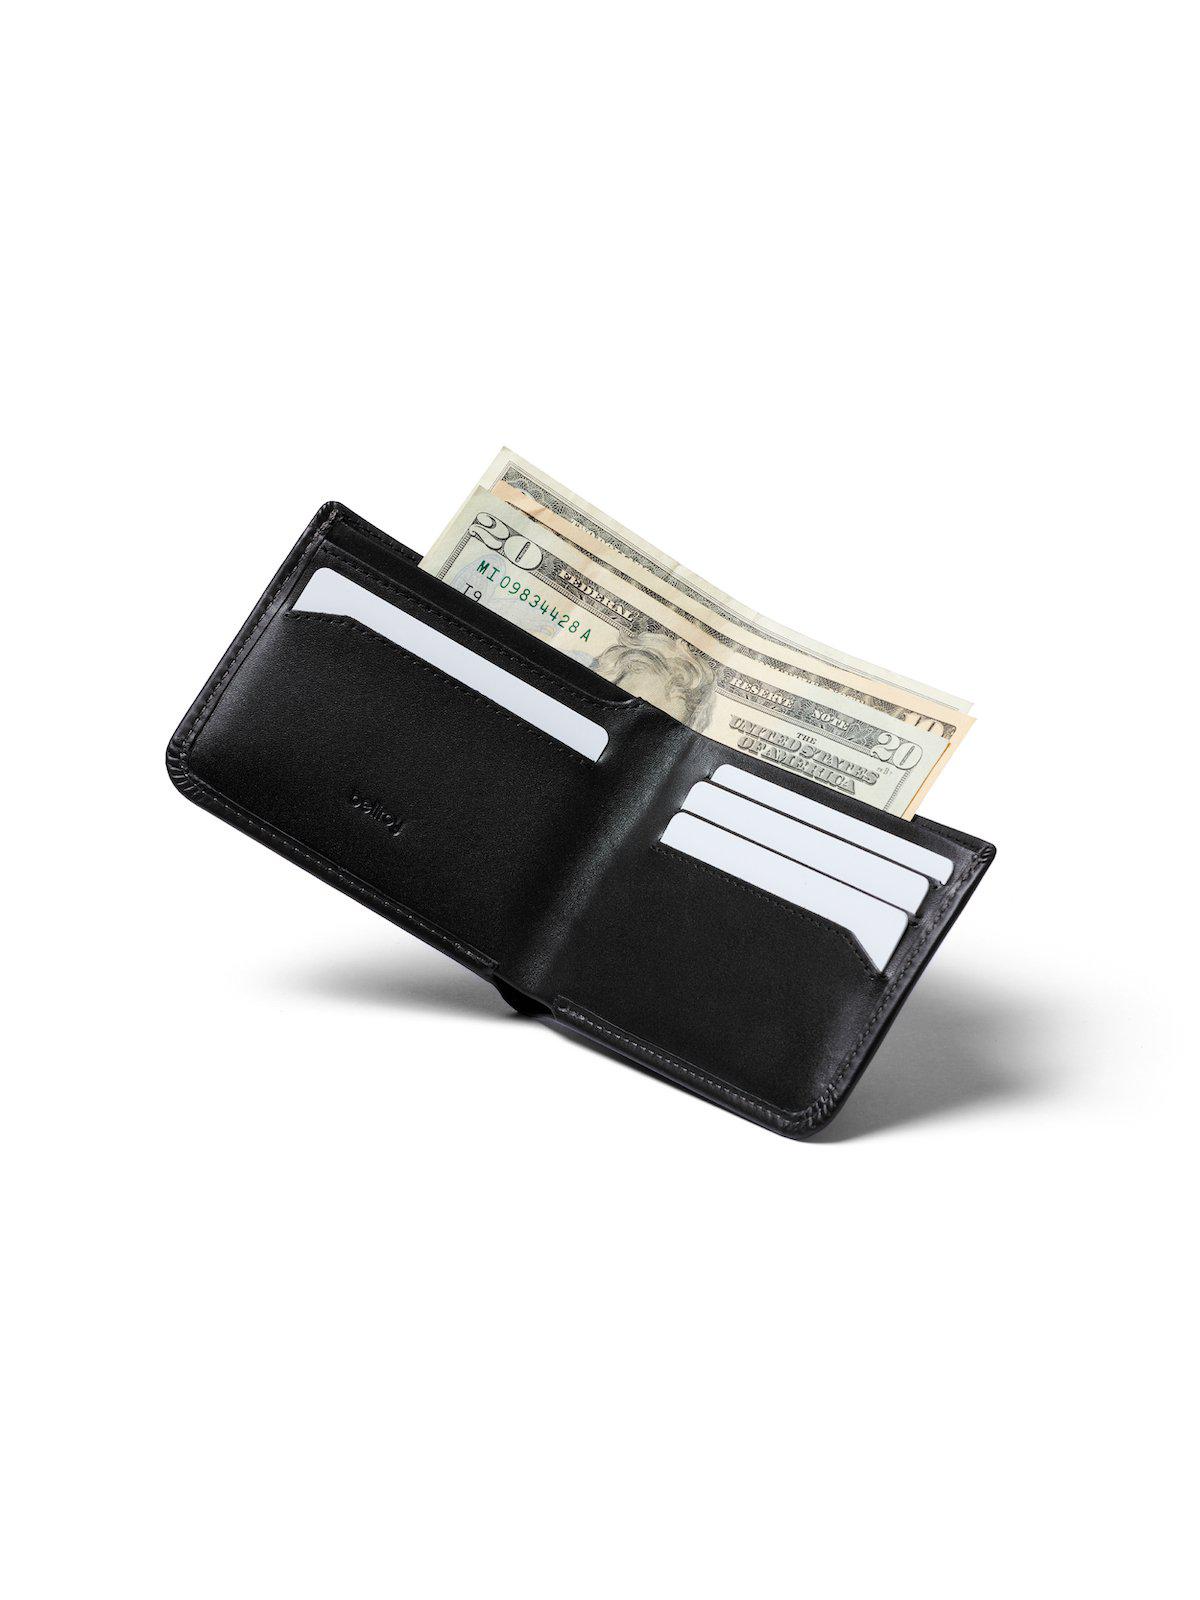 Bellroy Hide and Seek Wallet Black RFID - MORE by Morello Indonesia